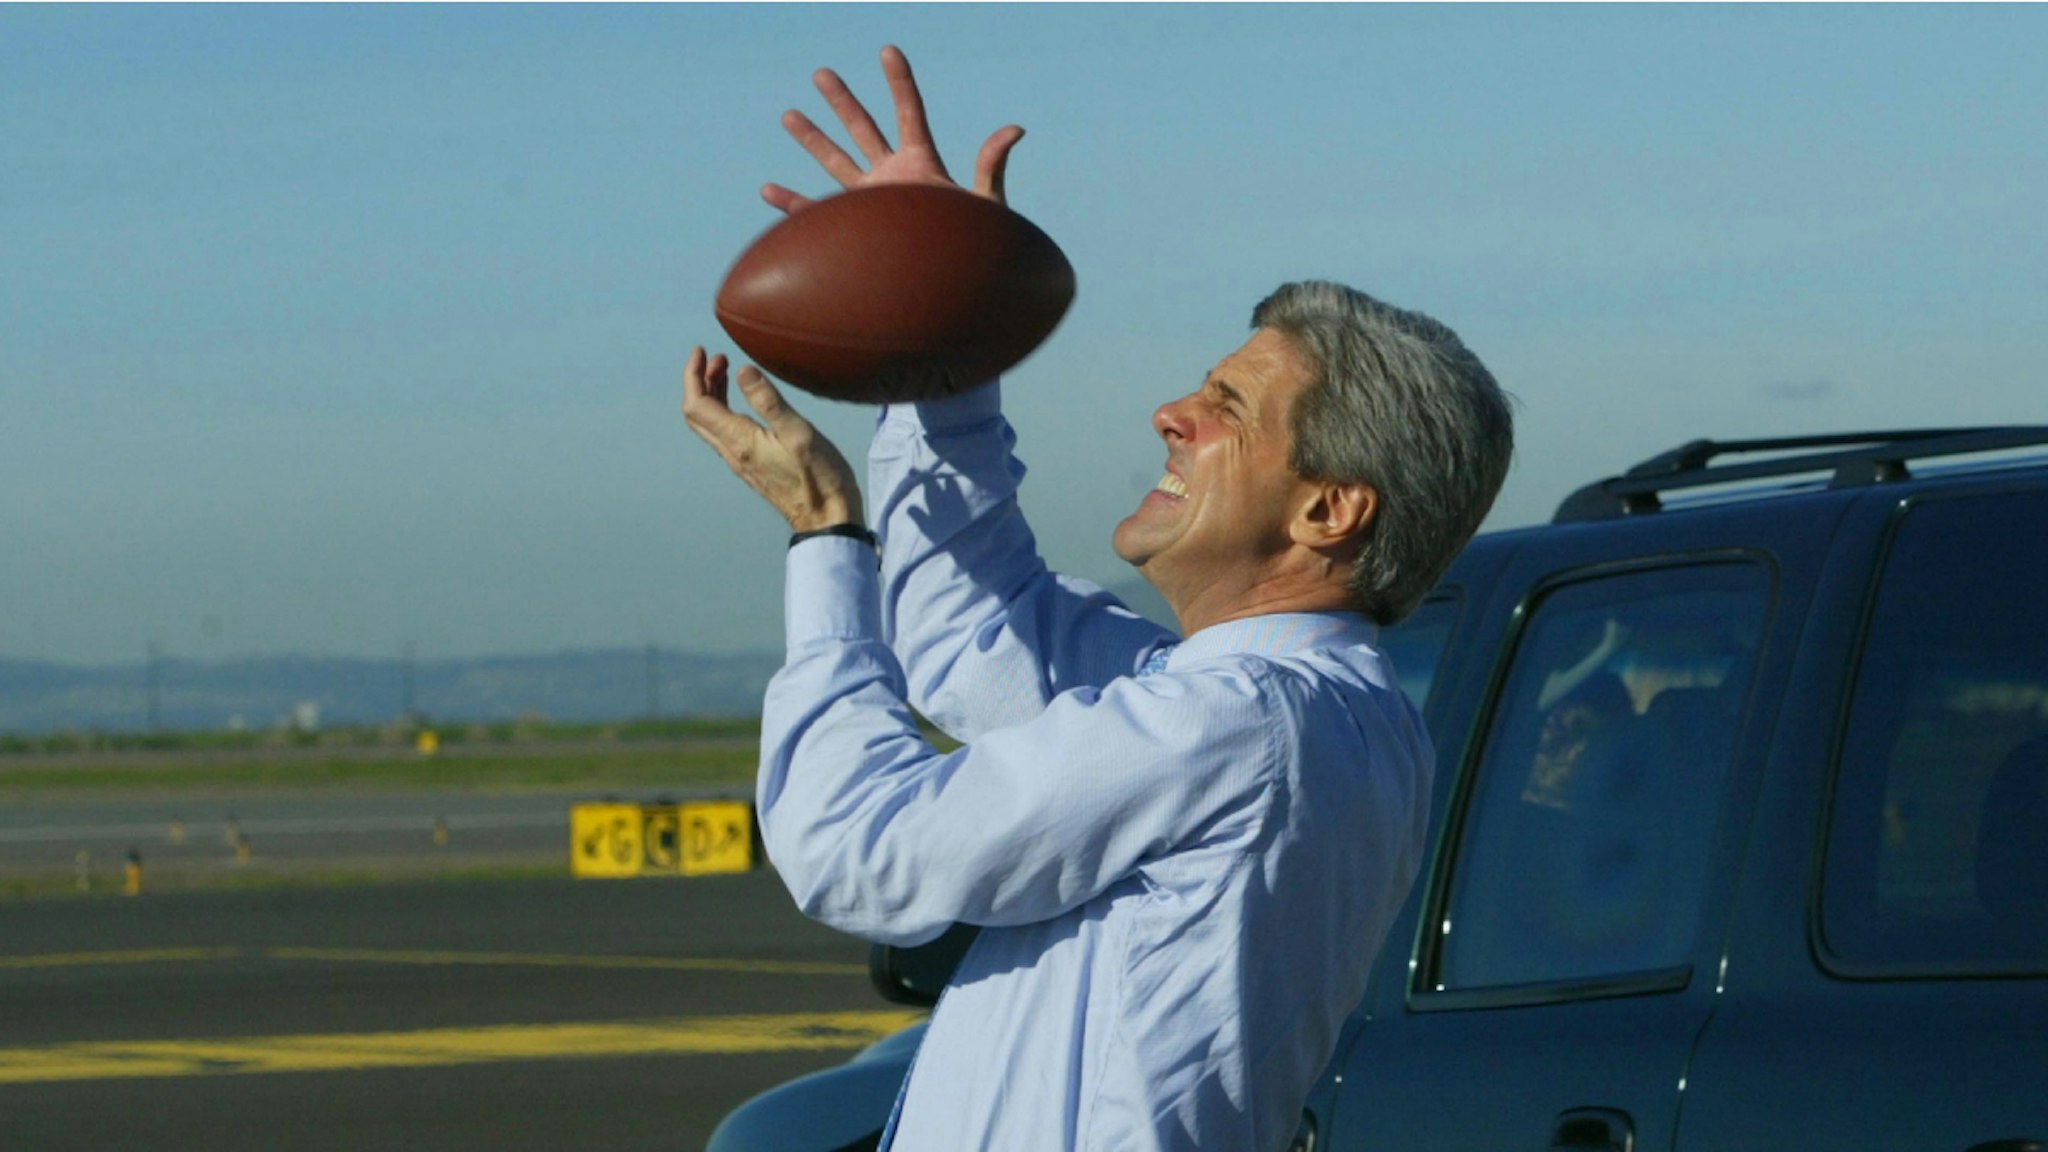 OAKLAND, CA - FEBRUARY 28: U.S. Senator John Kerry (D-MA) plays football on the tarmac February 28, 2004 in Oakland, California. Democratic presidential candidate Kerry is scheduled to appear at a town hall-style meeting in Brooklyn, New York, this evening.